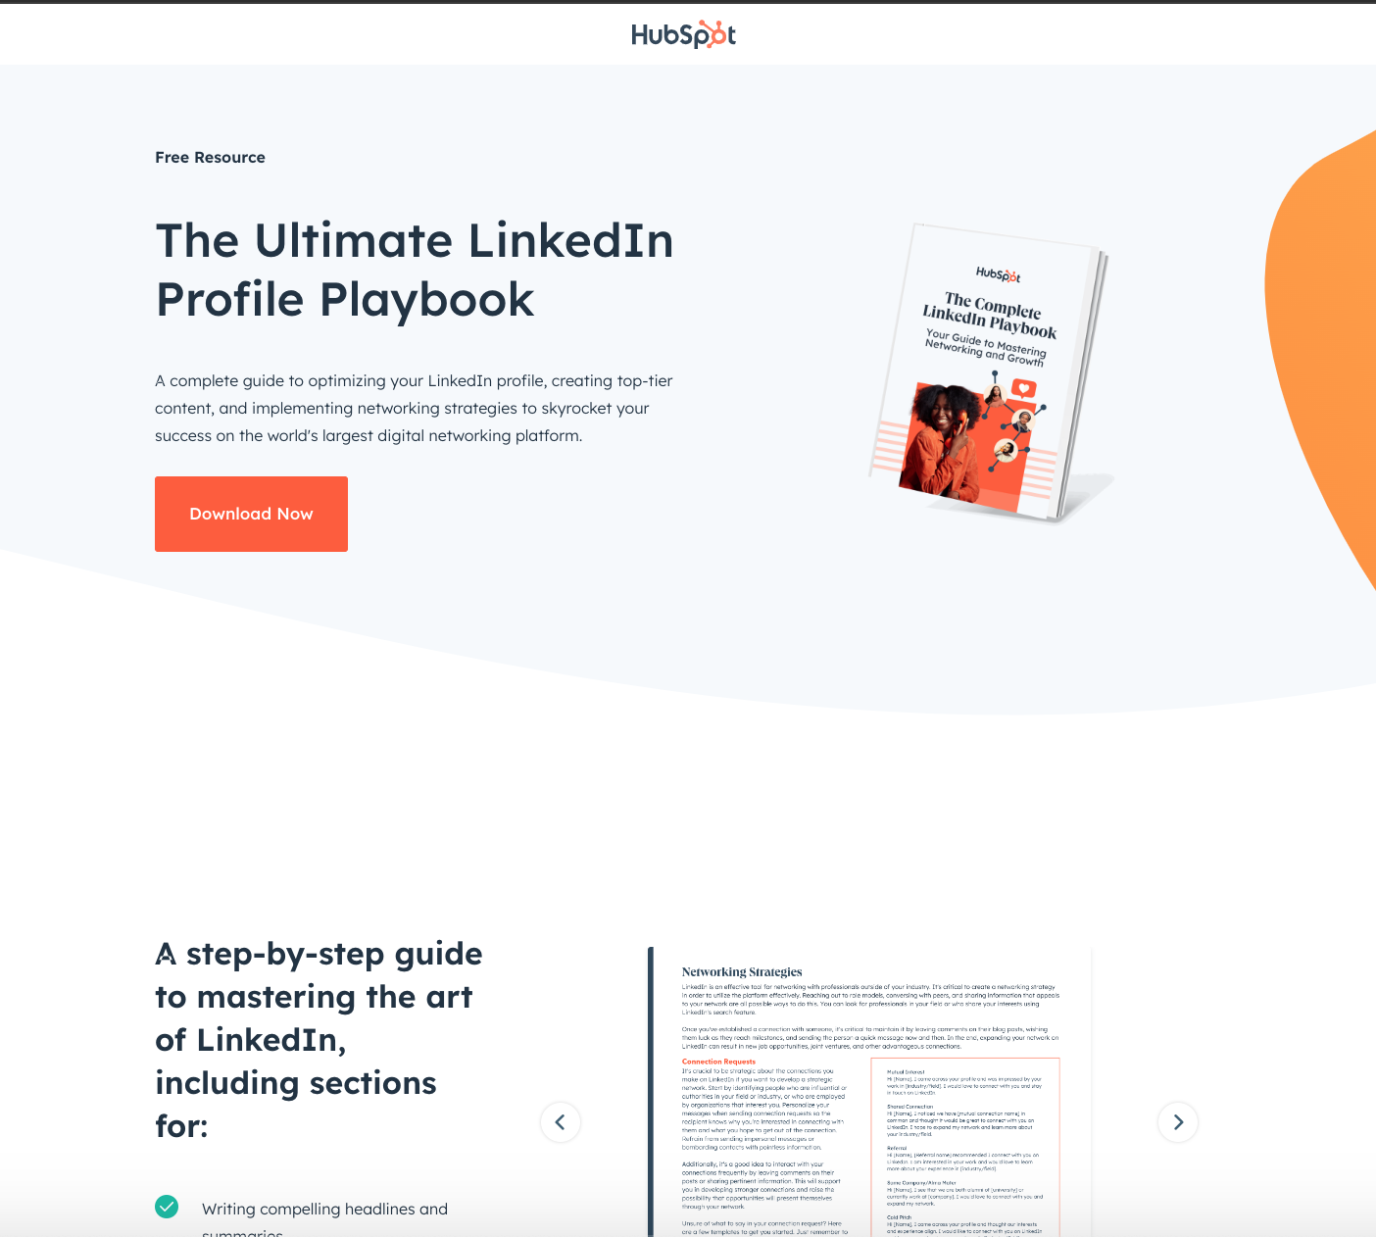 Hubspot lead generation landing page example